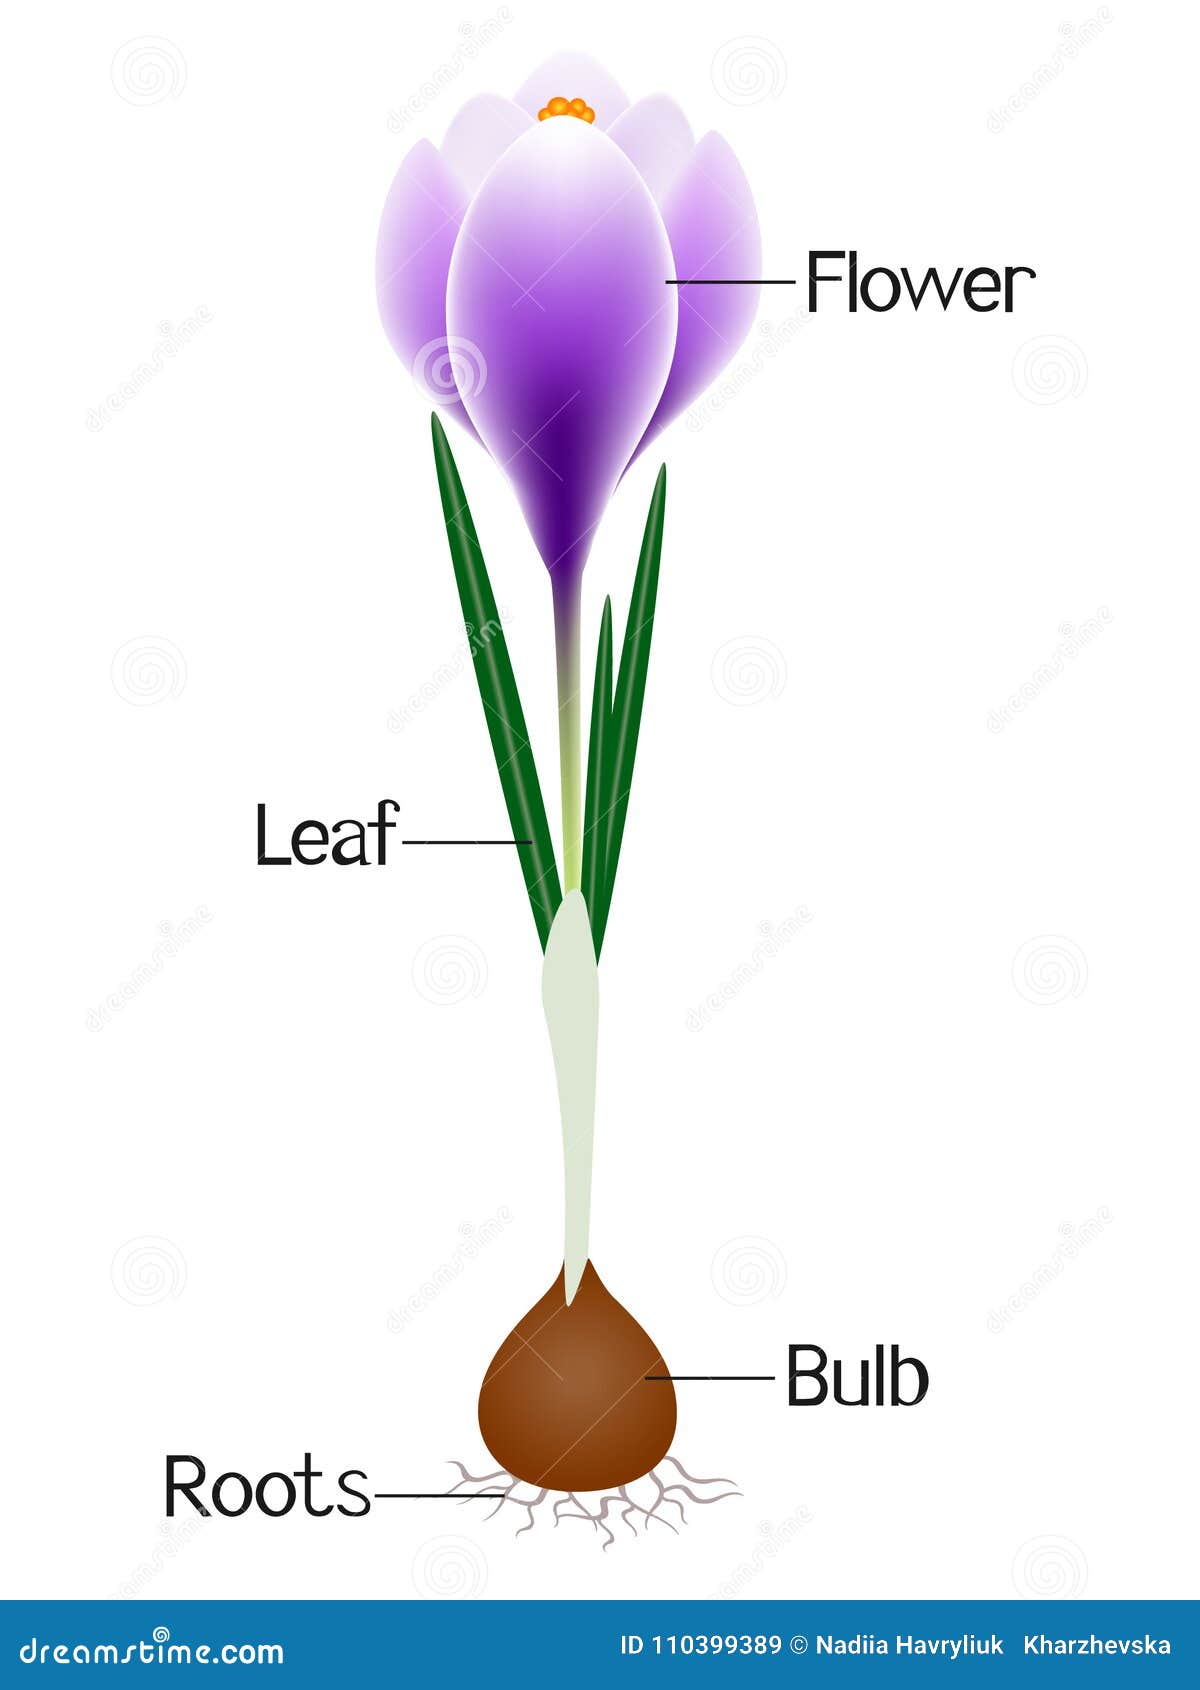 An Illustration Showing Parts of a Purple Crocus Plant. Stock Vector ...